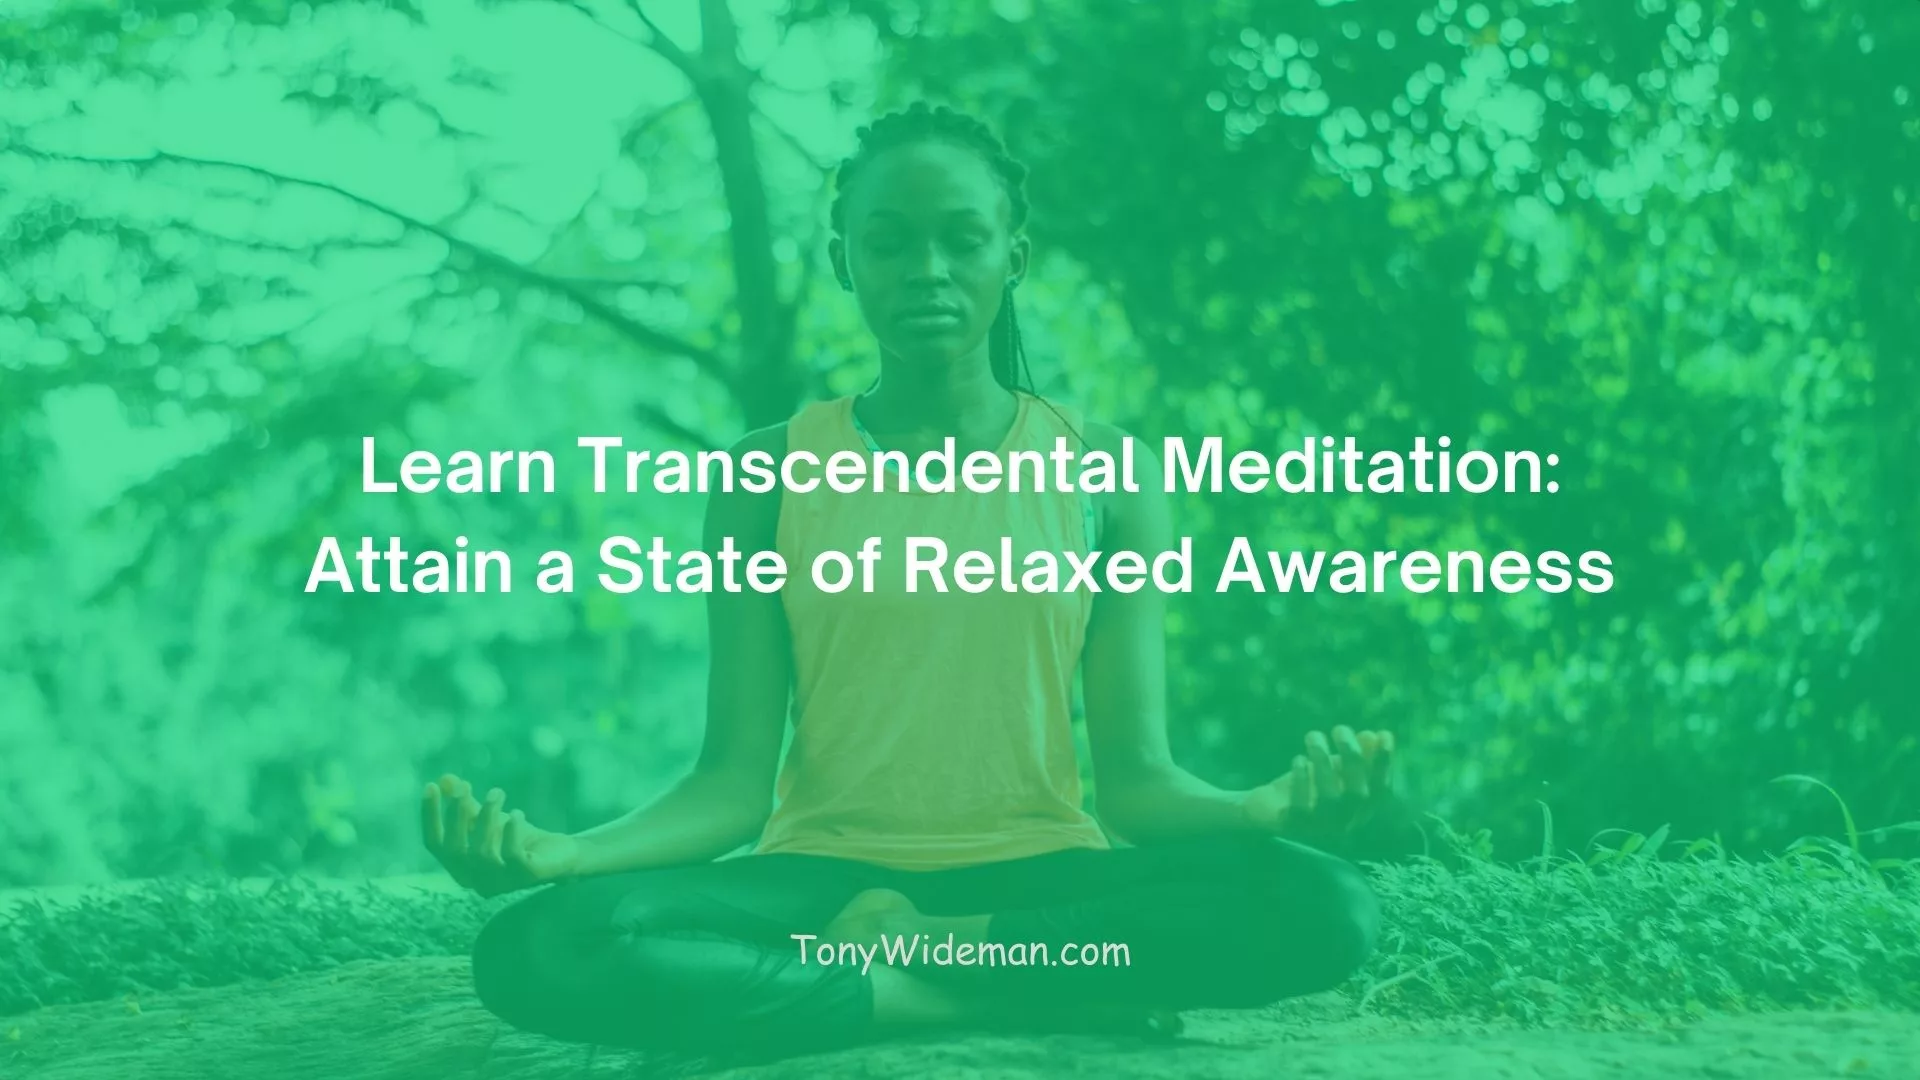 Learn Transcendental Meditation: Attain a State of Relaxed Awareness